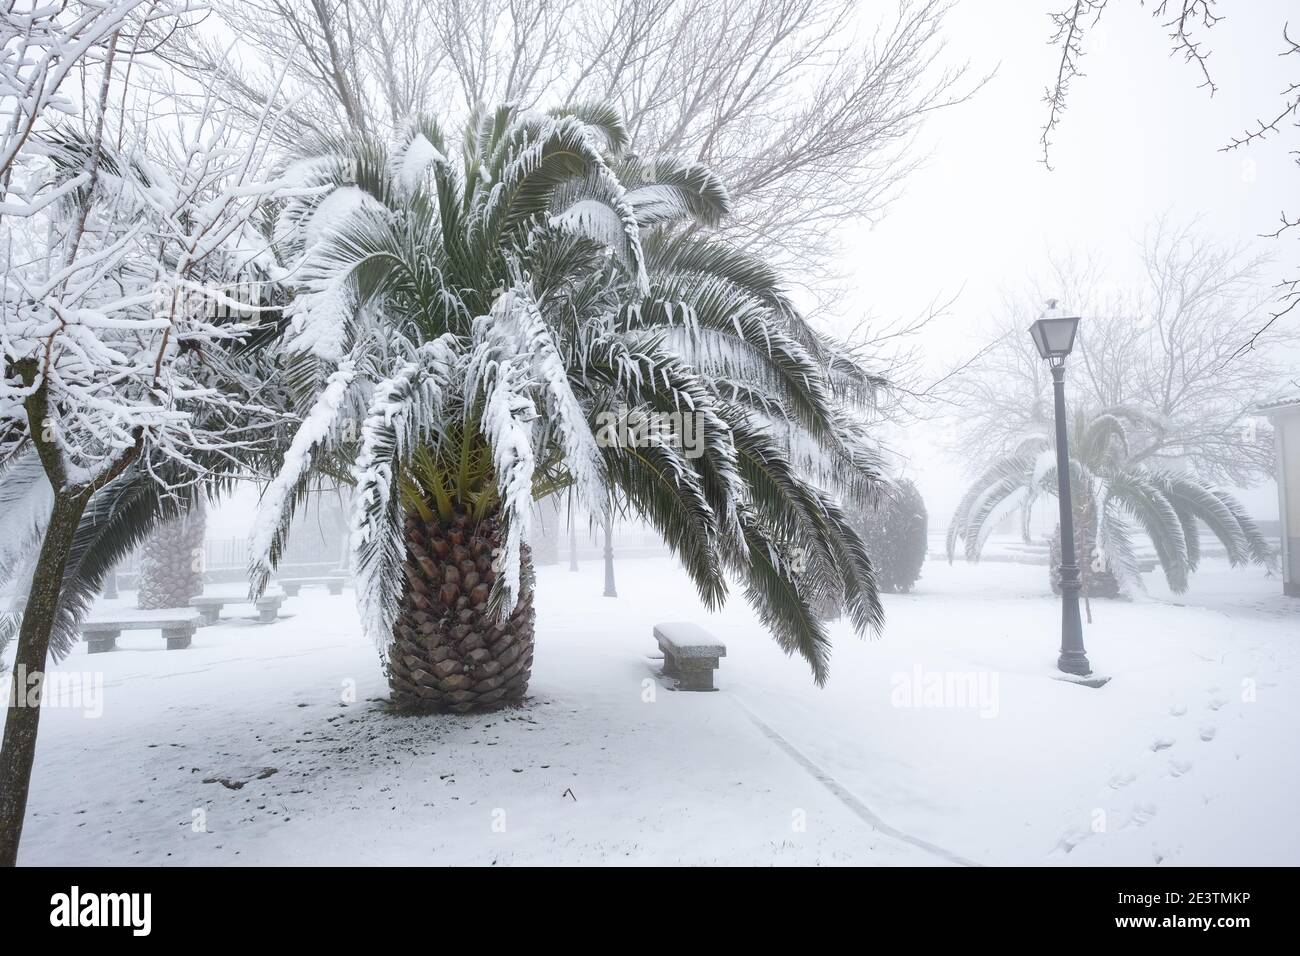 an unusual image of a large palm tree with large leaves buried under a thick layer of snow, concept climate change, spain, extremadura Stock Photo